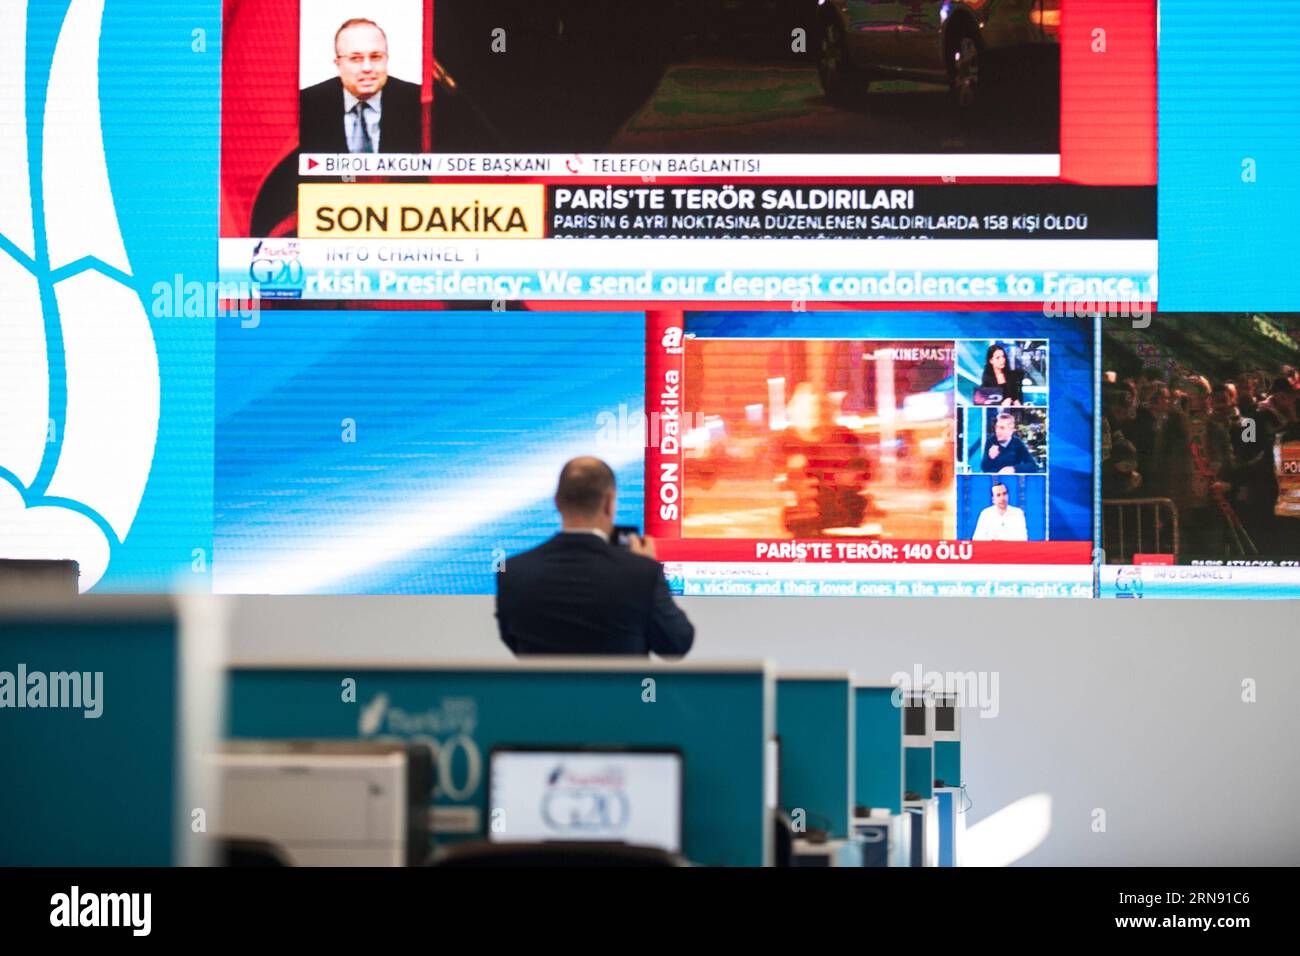 A staff films the news broadcasting Paris attacks on screen at the press center of G20 summit, in Antalya, a Mediterranean resort city of Turkey, on Nov. 13, 2015. French President Francois Hollande canceled his trip to Turkey for the upcoming G20 summit because of the multiple attacks in Paris on Friday. ) TURKEY-ANTALYA-FRENCH PRESIDENT-TRIP-CANCEL PanxChaoyue PUBLICATIONxNOTxINxCHN   a Staff Films The News Broadcasting Paris Attacks ON Screen AT The Press Center of G20 Summit in Antalya a Mediterranean Resort City of Turkey ON Nov 13 2015 French President François Hollande canceled His Trip Stock Photo